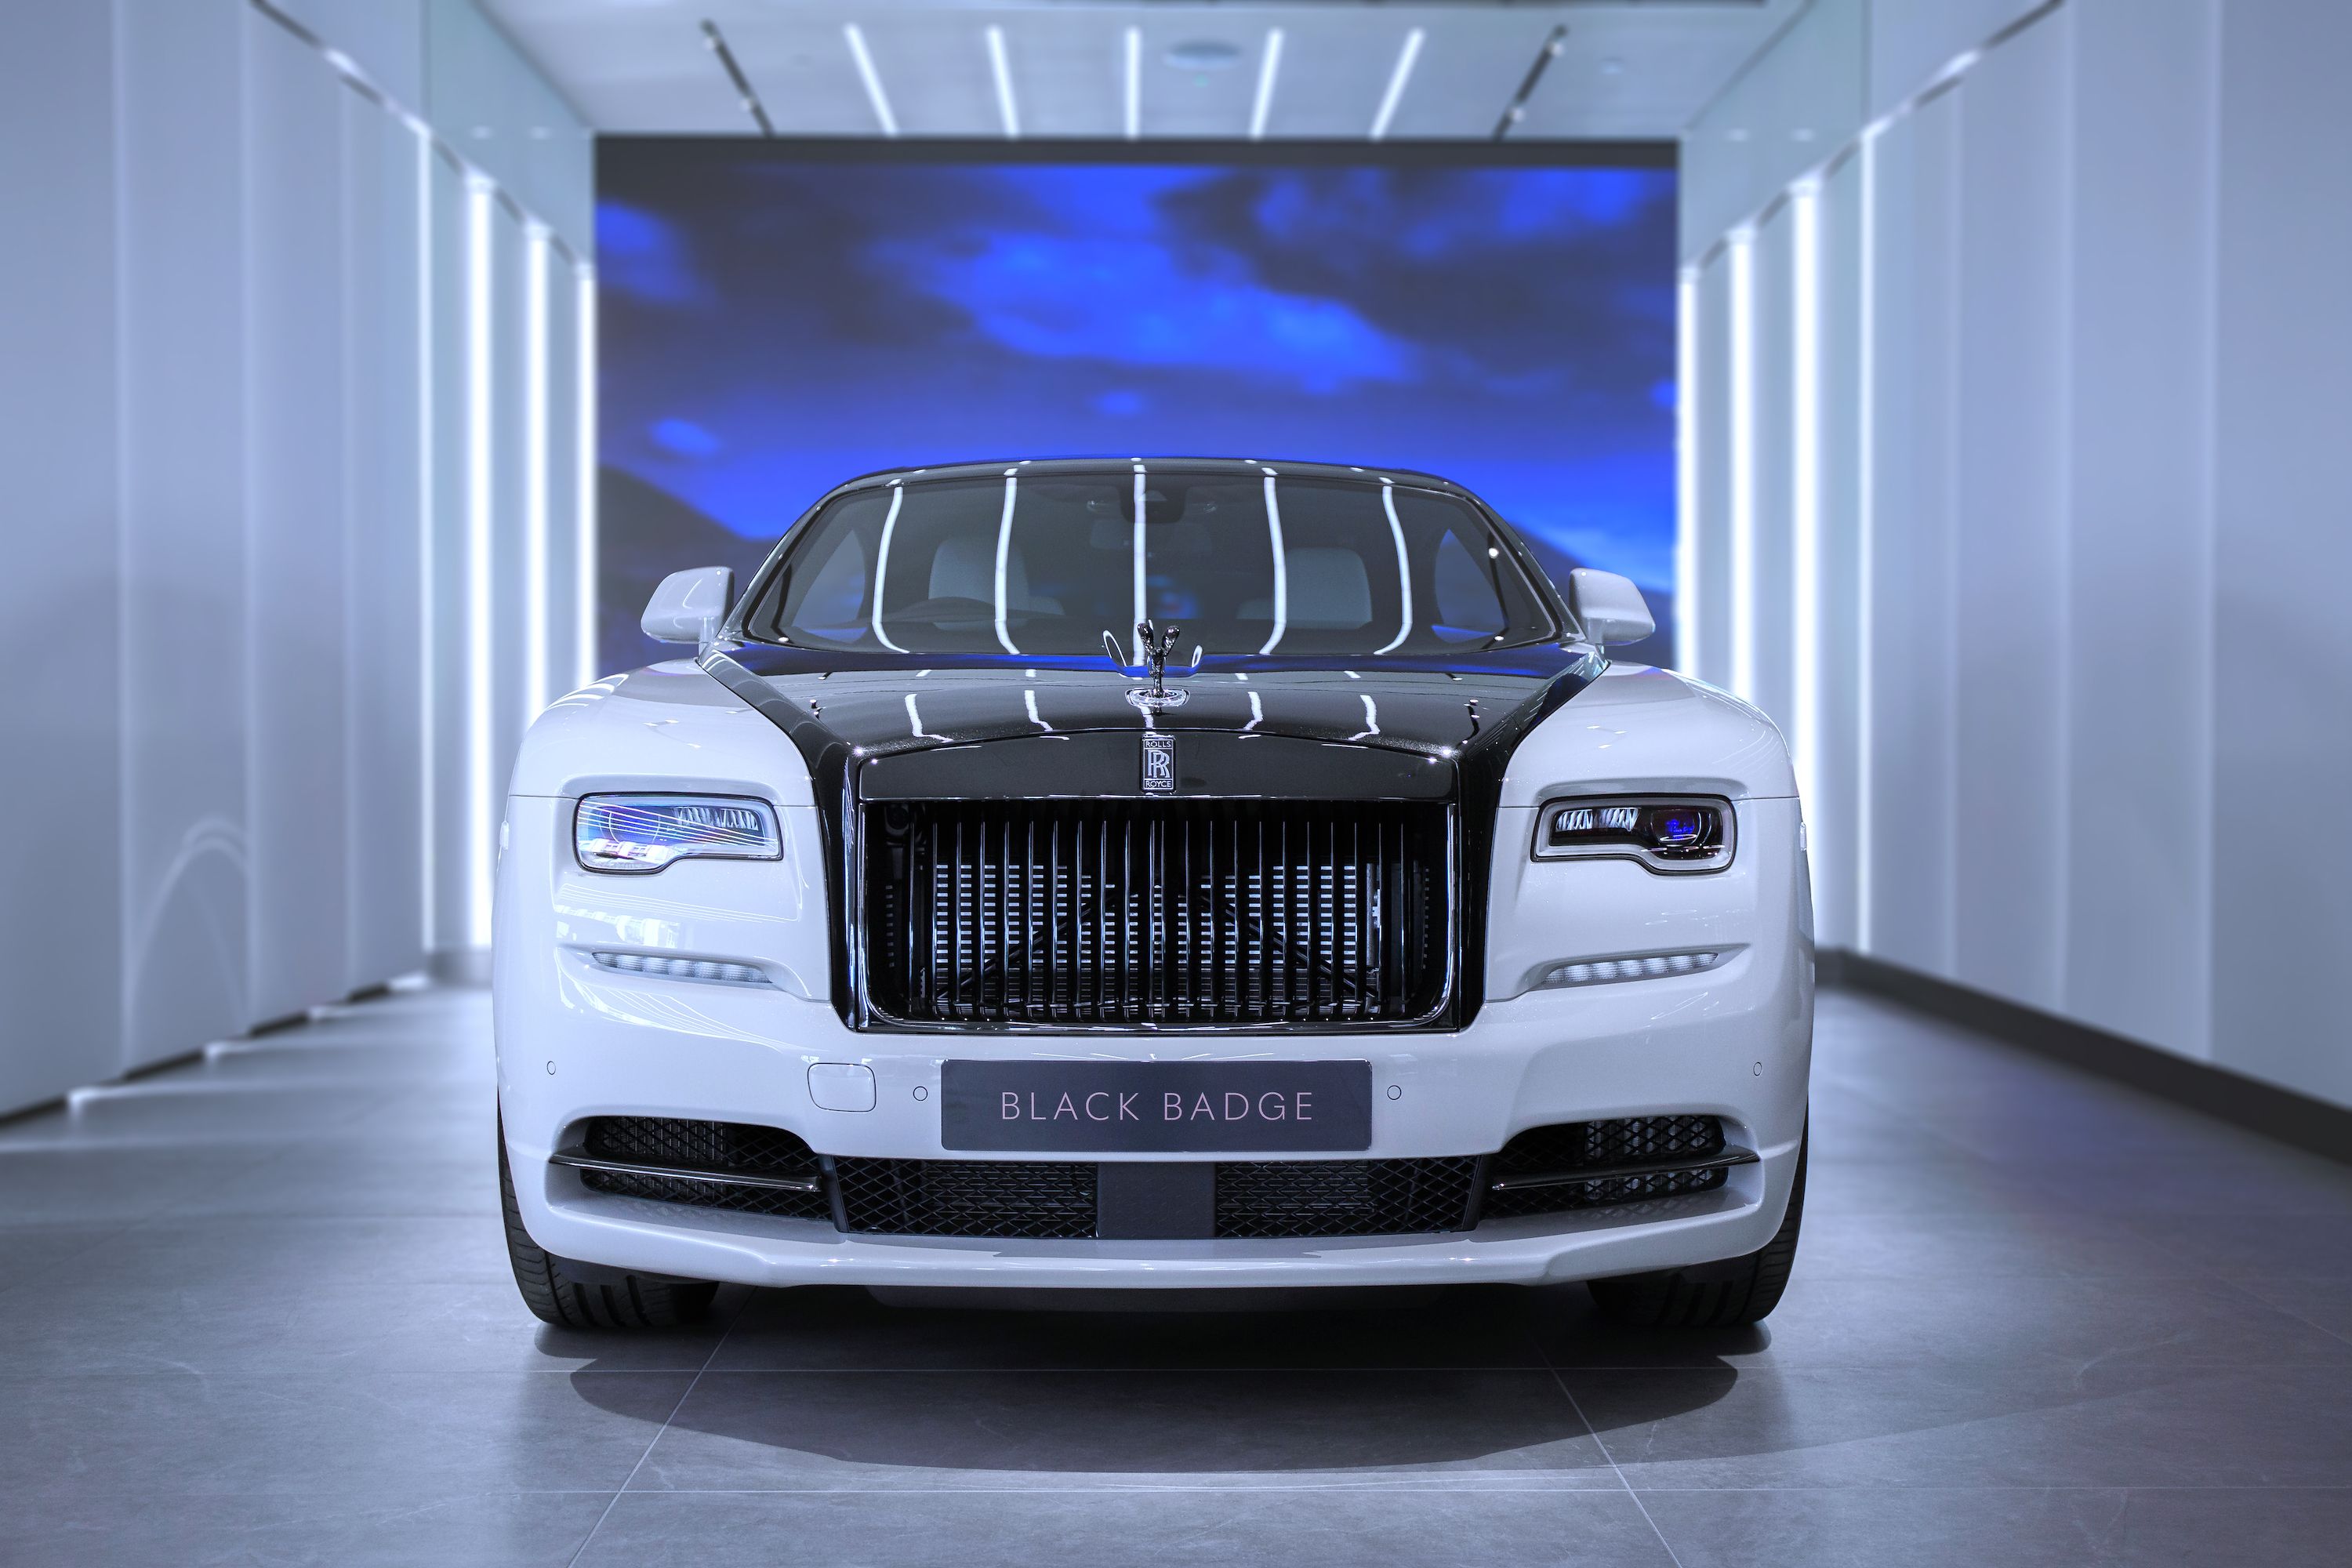 Fully Electric RollsRoyce Spectre Makes Spy Image Debut Looks Gotham City Approved  autoevolution